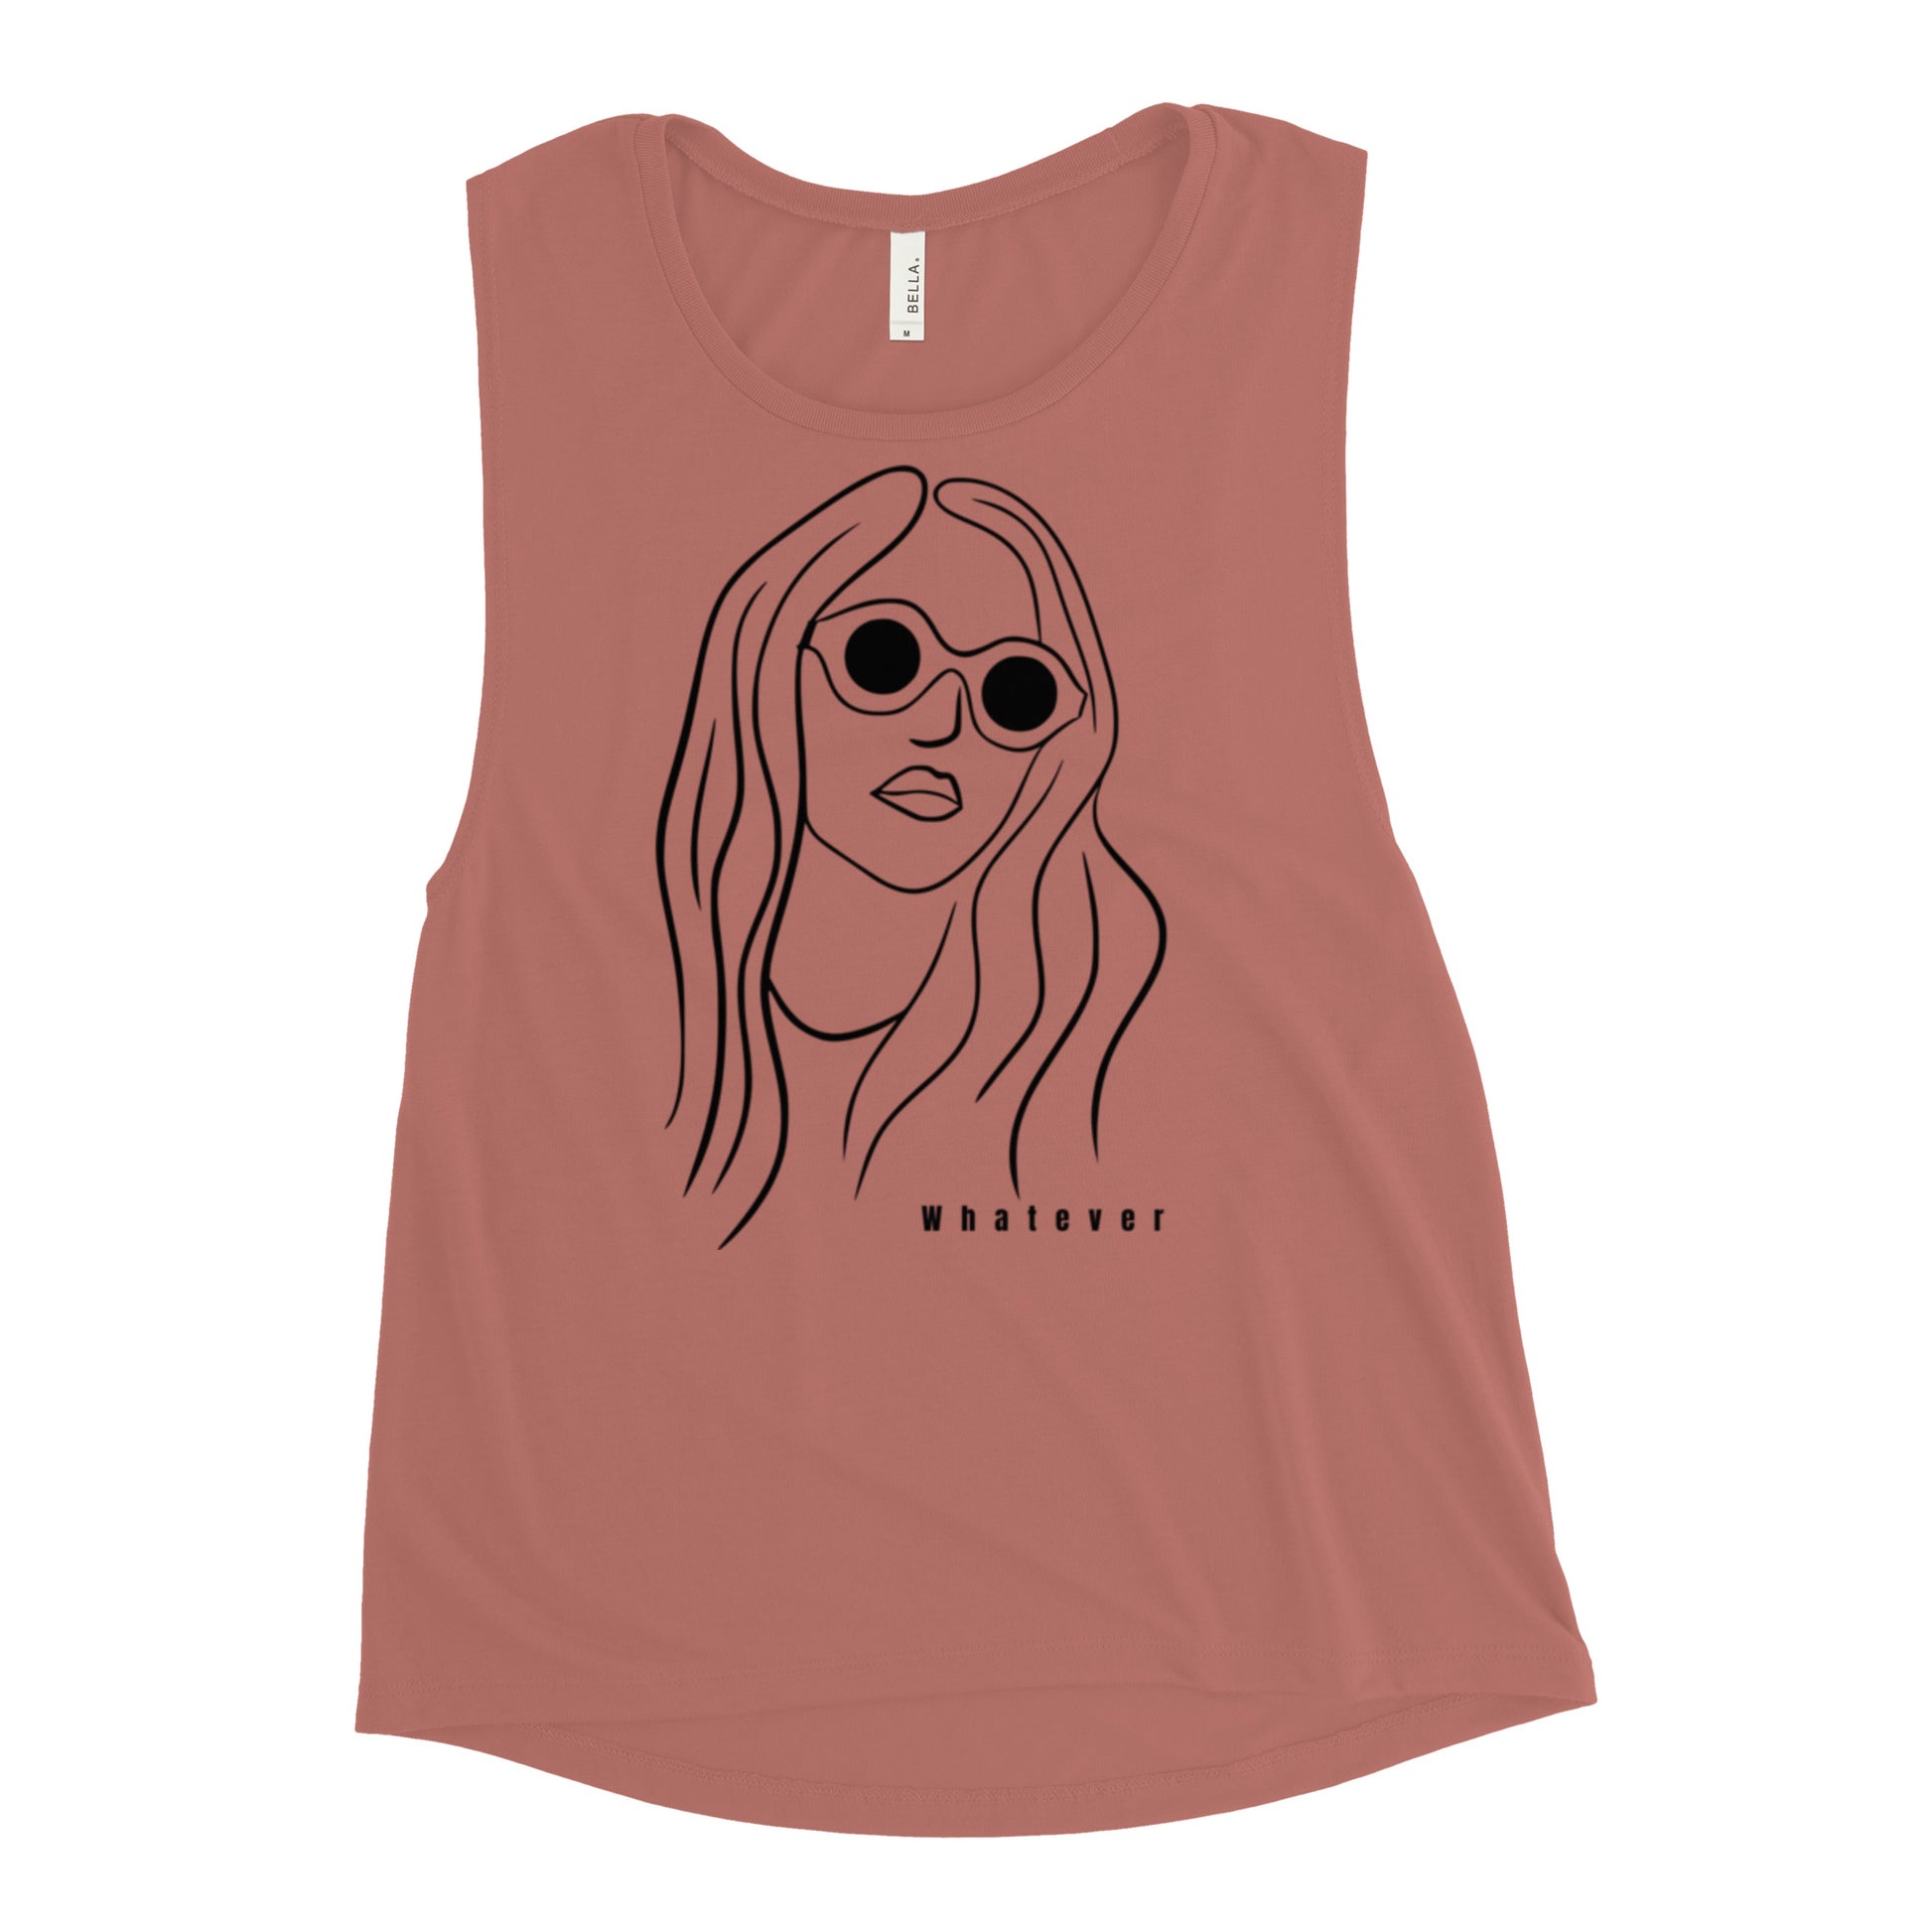 Whatever Graphic Womens Tank